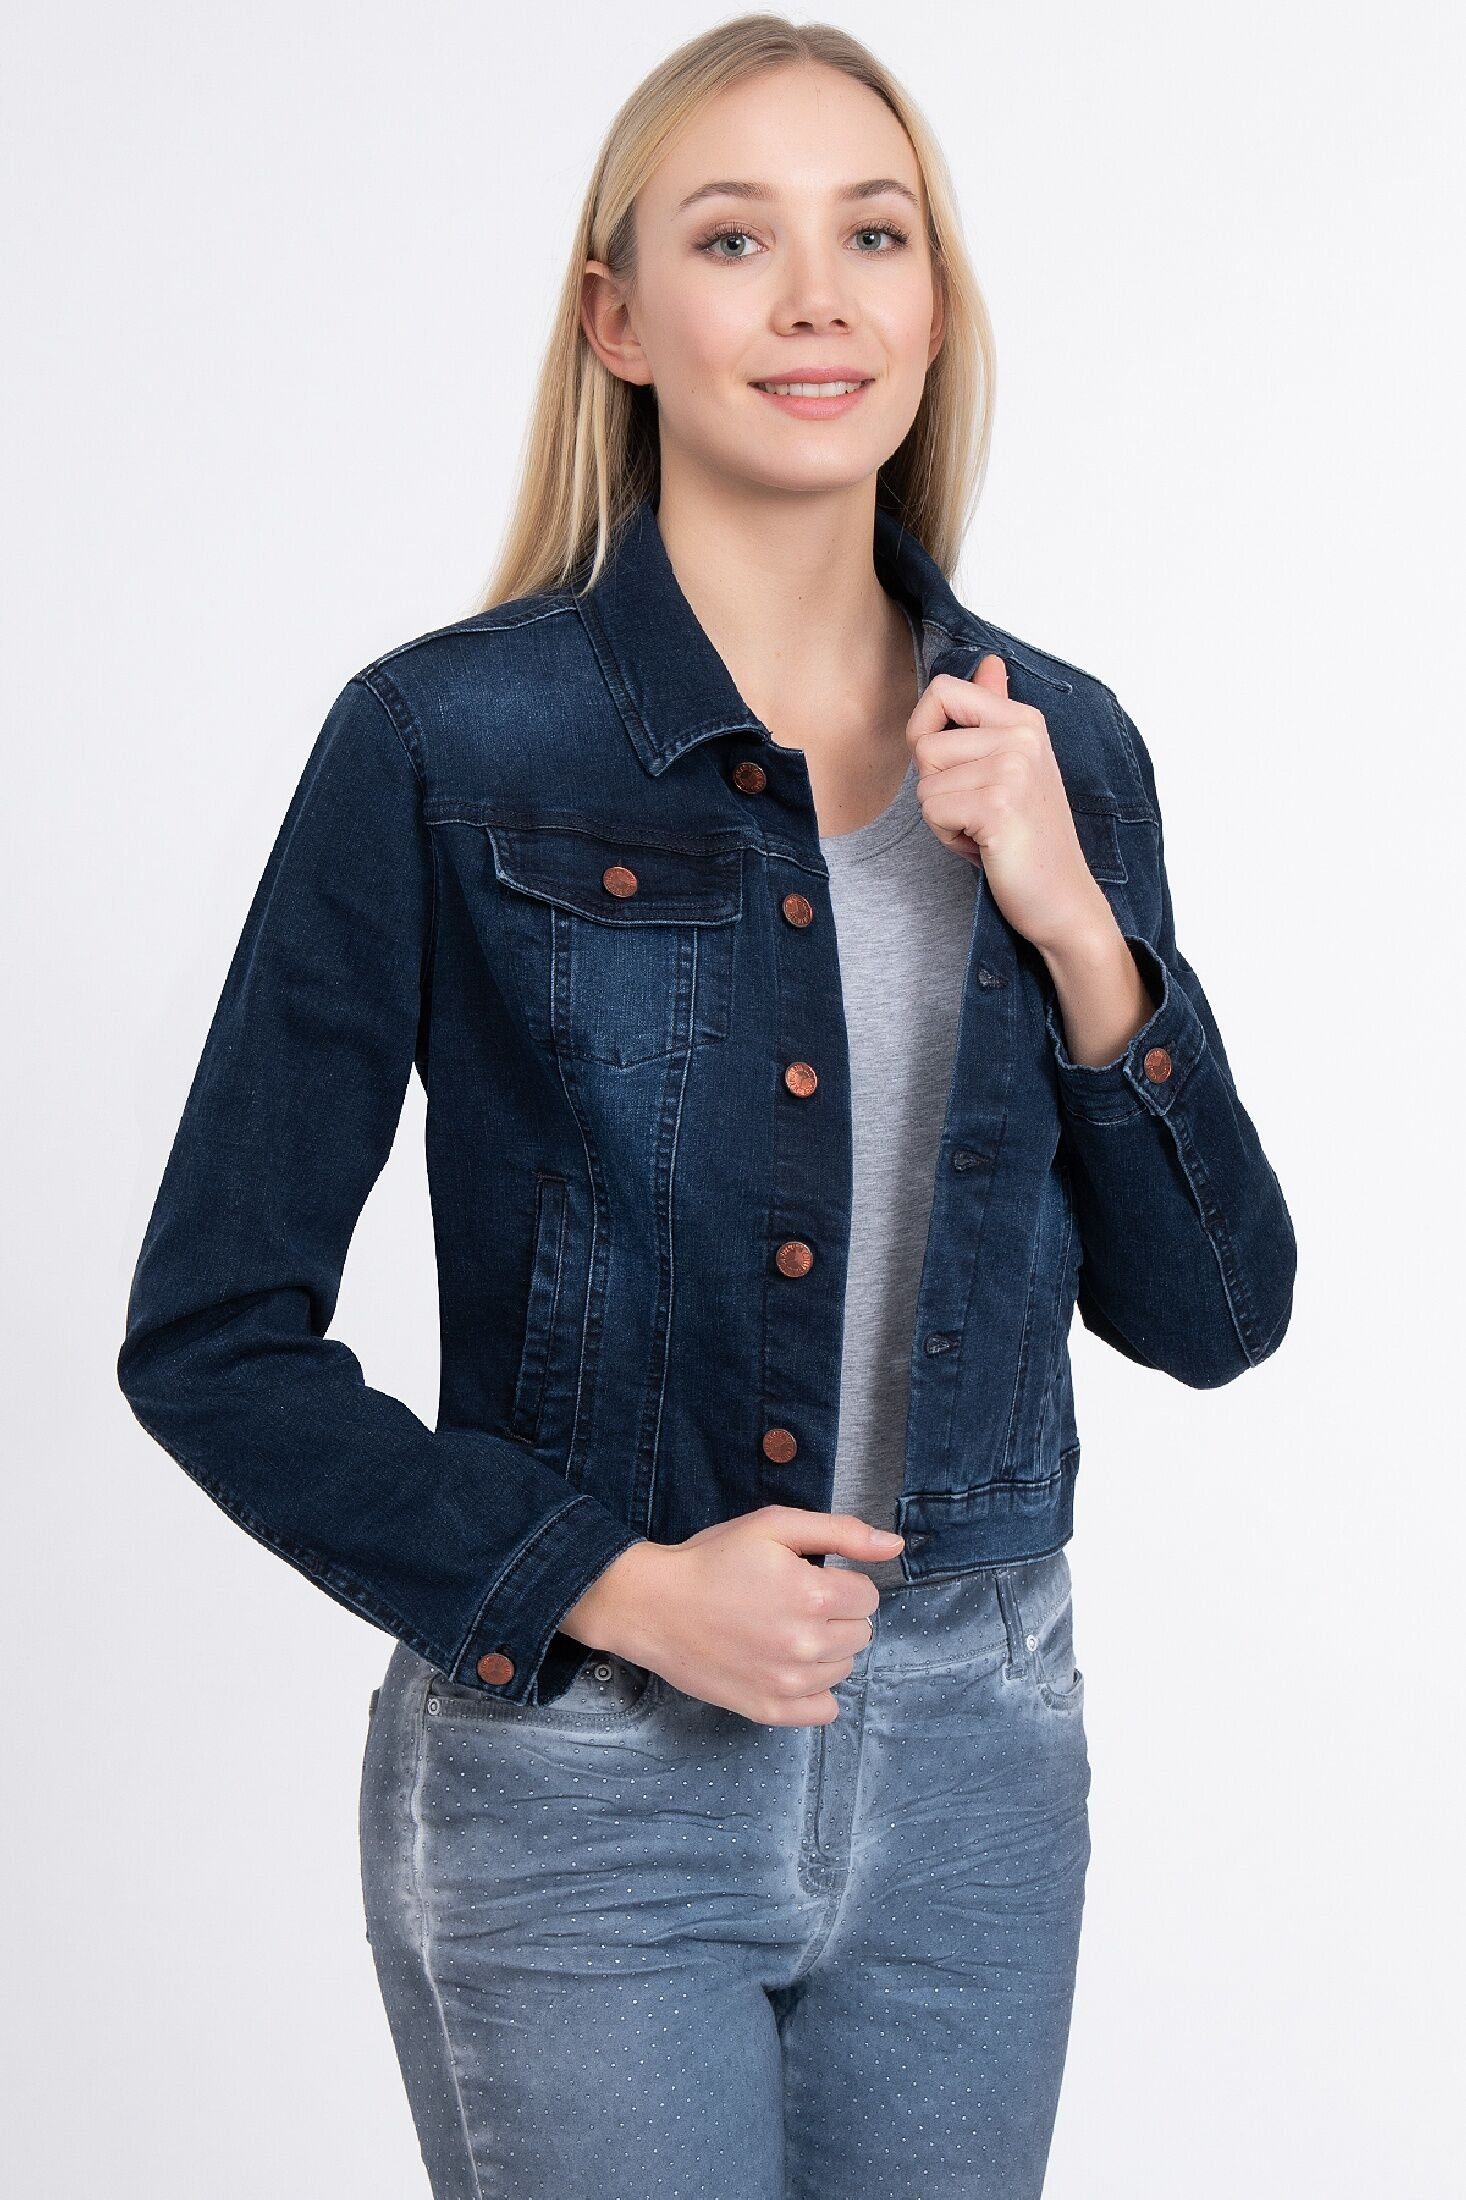 Recover Pants Jeansjacke CHIC DEEP-BLUE